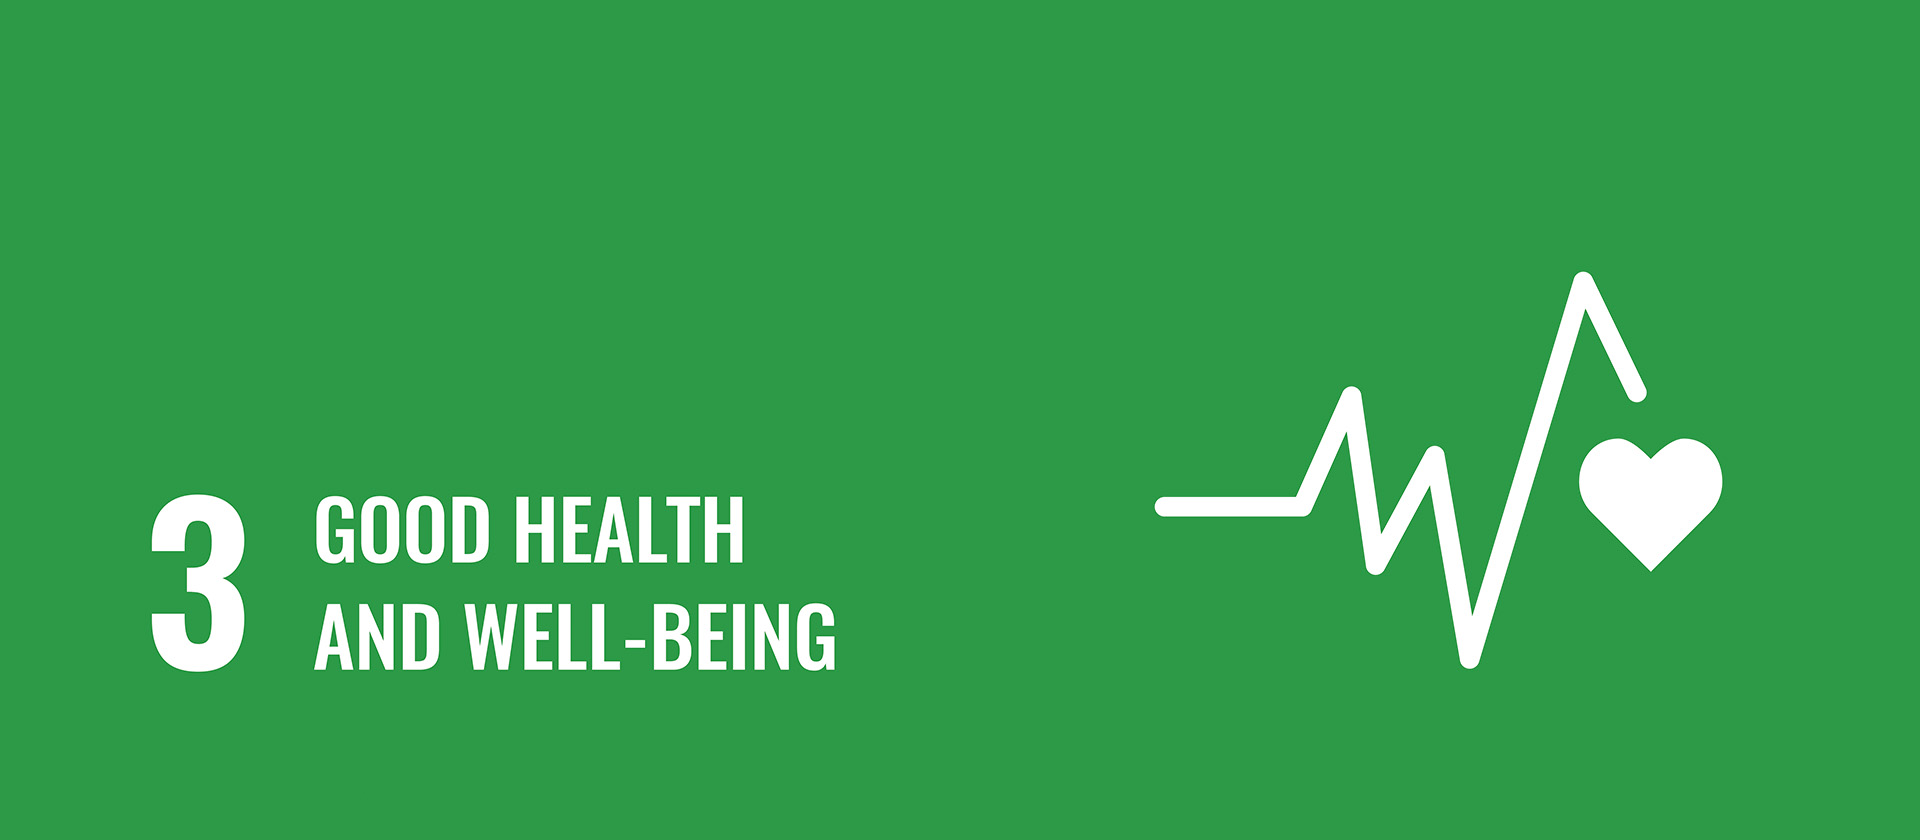 Goal 3: Good health and wellbeing